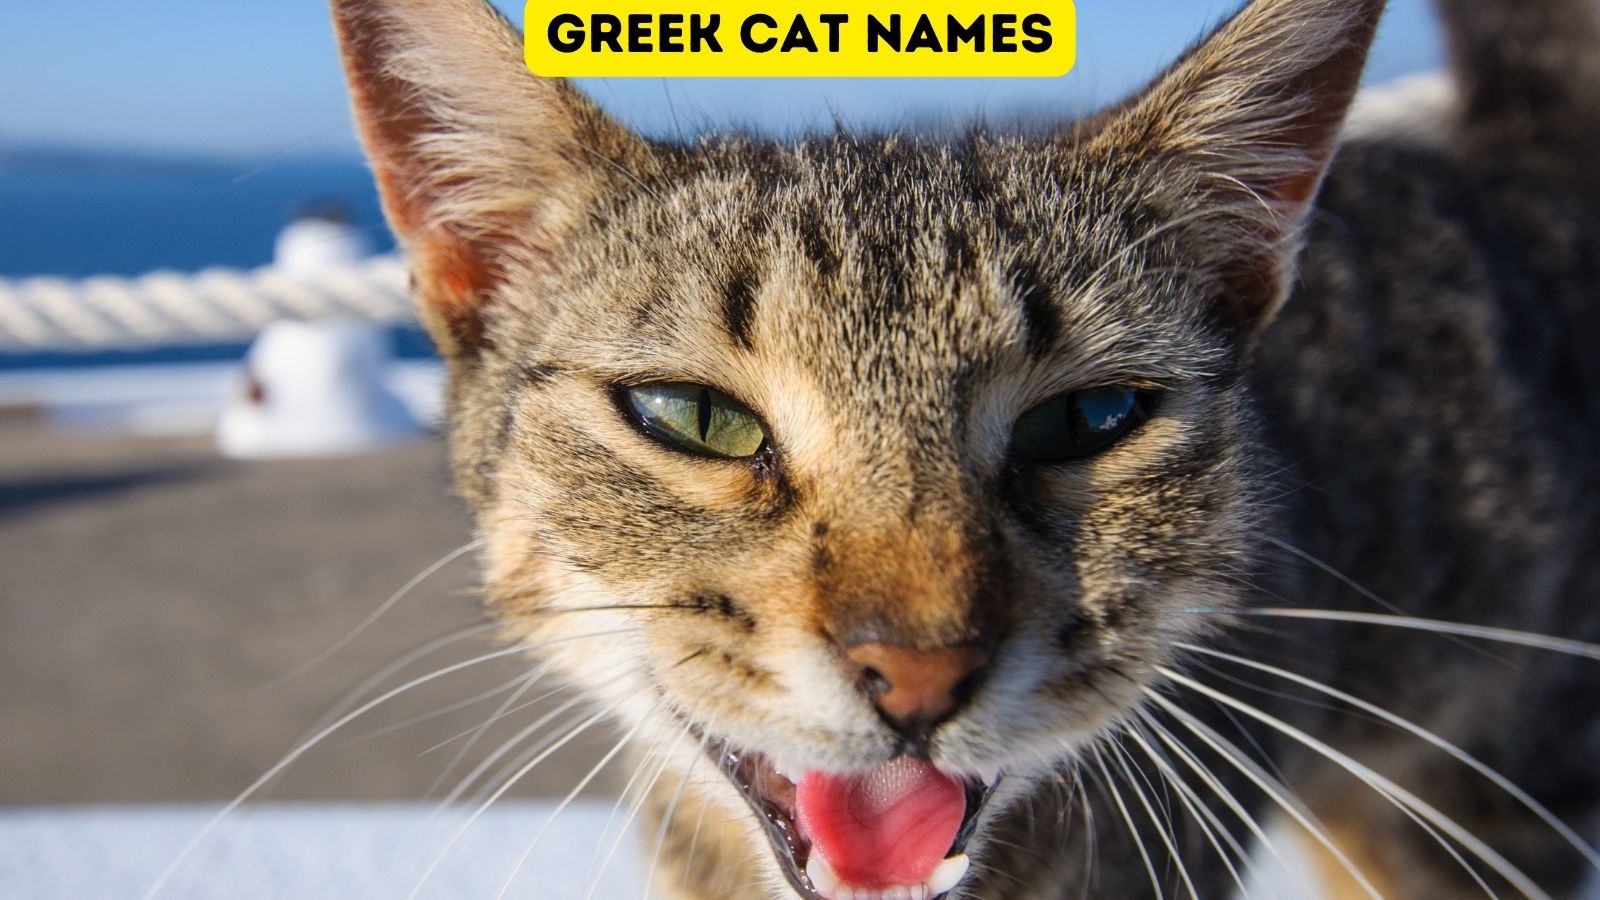 Meow Name Generator in 2023  Warrior cats funny, Warrior cats